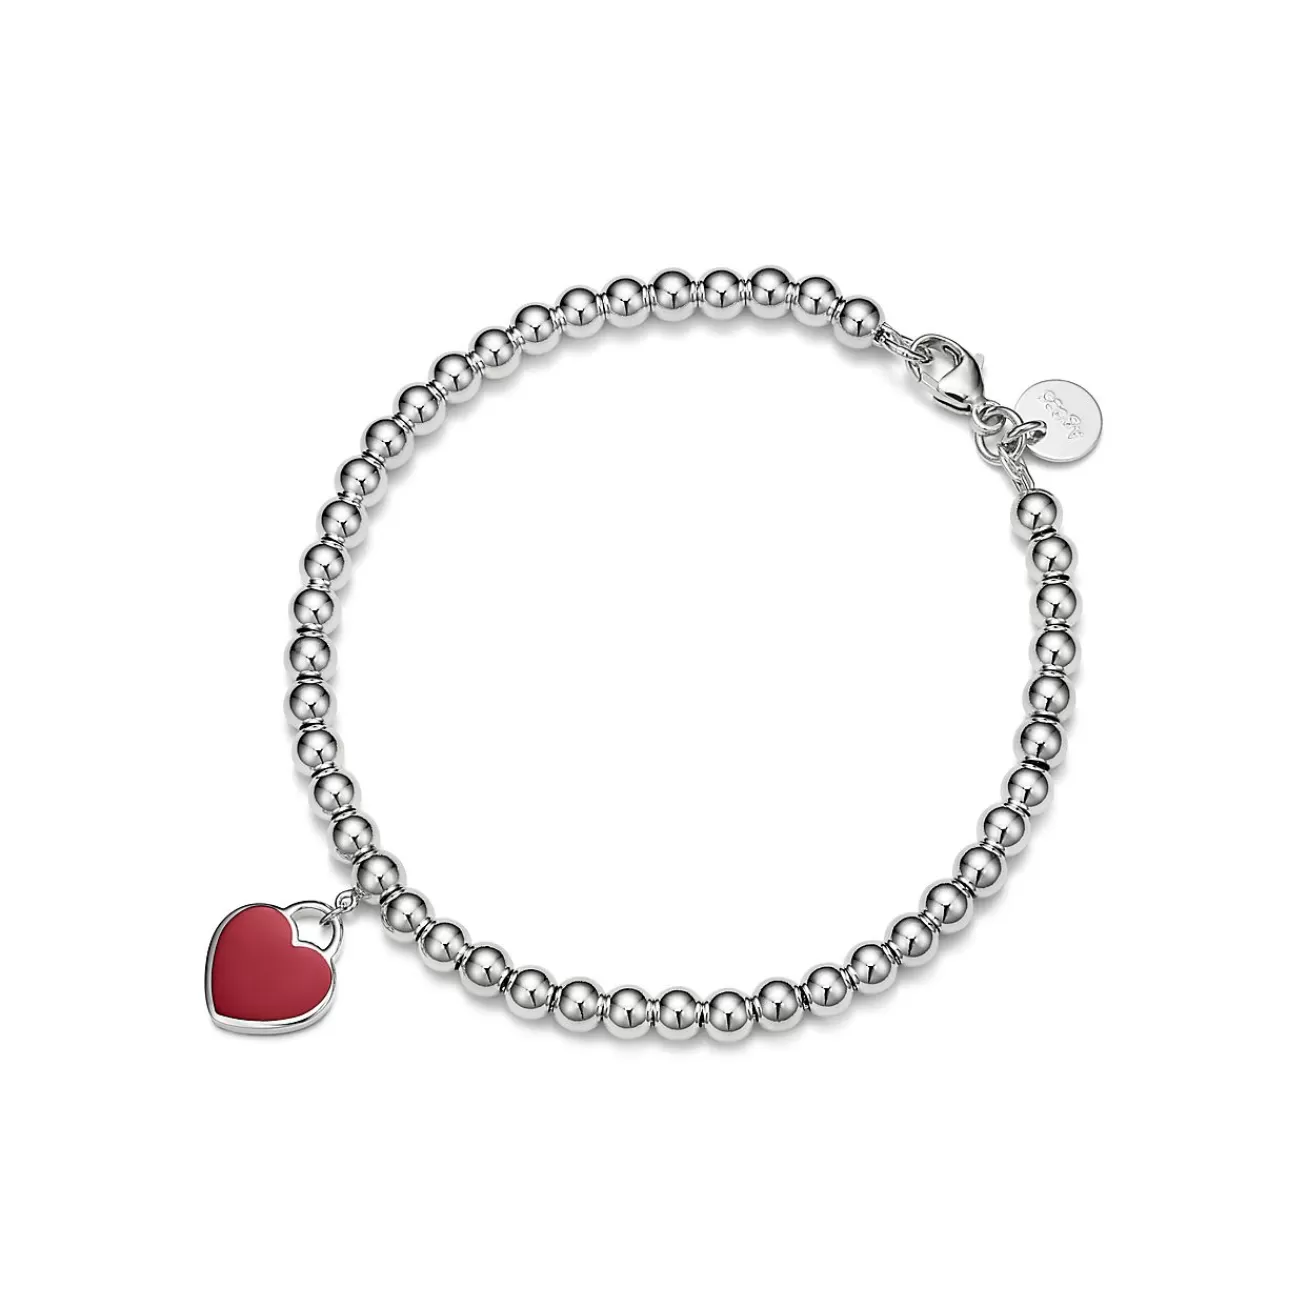 Tiffany & Co. Return to Tiffany® Red Mini Heart Bead Bracelet in Silver with a Diamond, 4 mm | ^ Bracelets | Gifts for Her